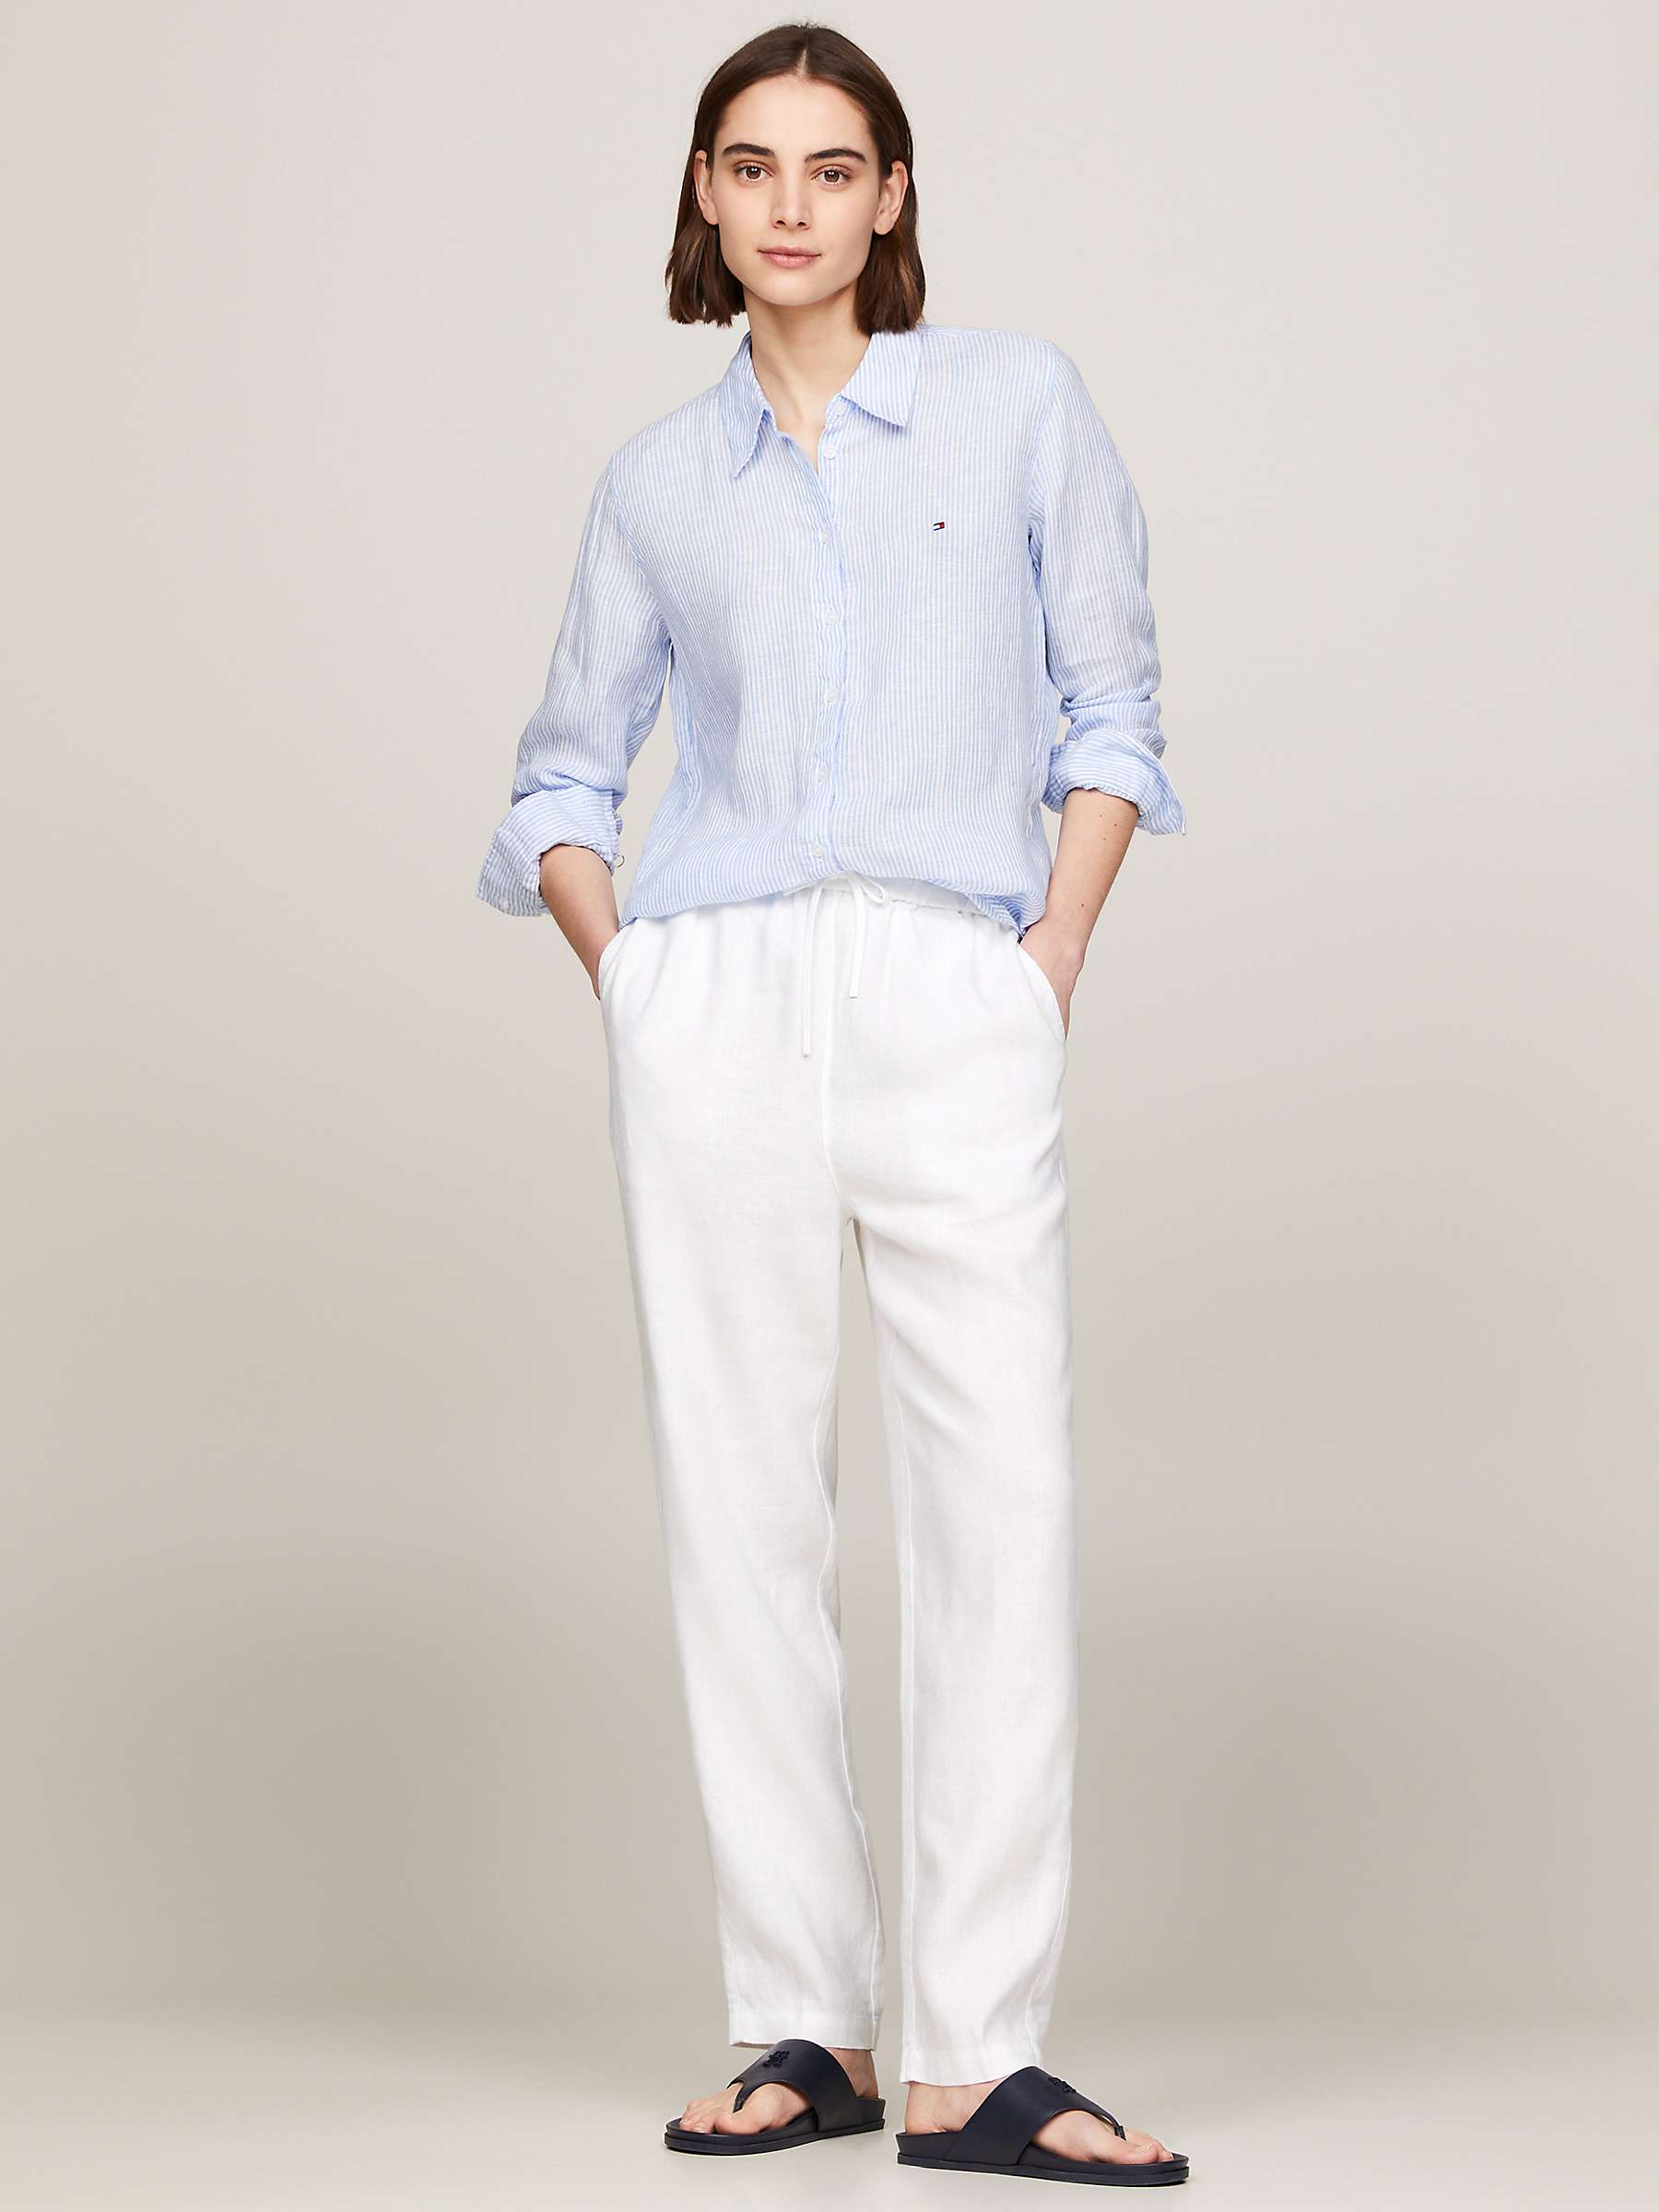 Buy Tommy Hilfiger Linen Blend Drawstring Trousers, Optic White Online at johnlewis.com